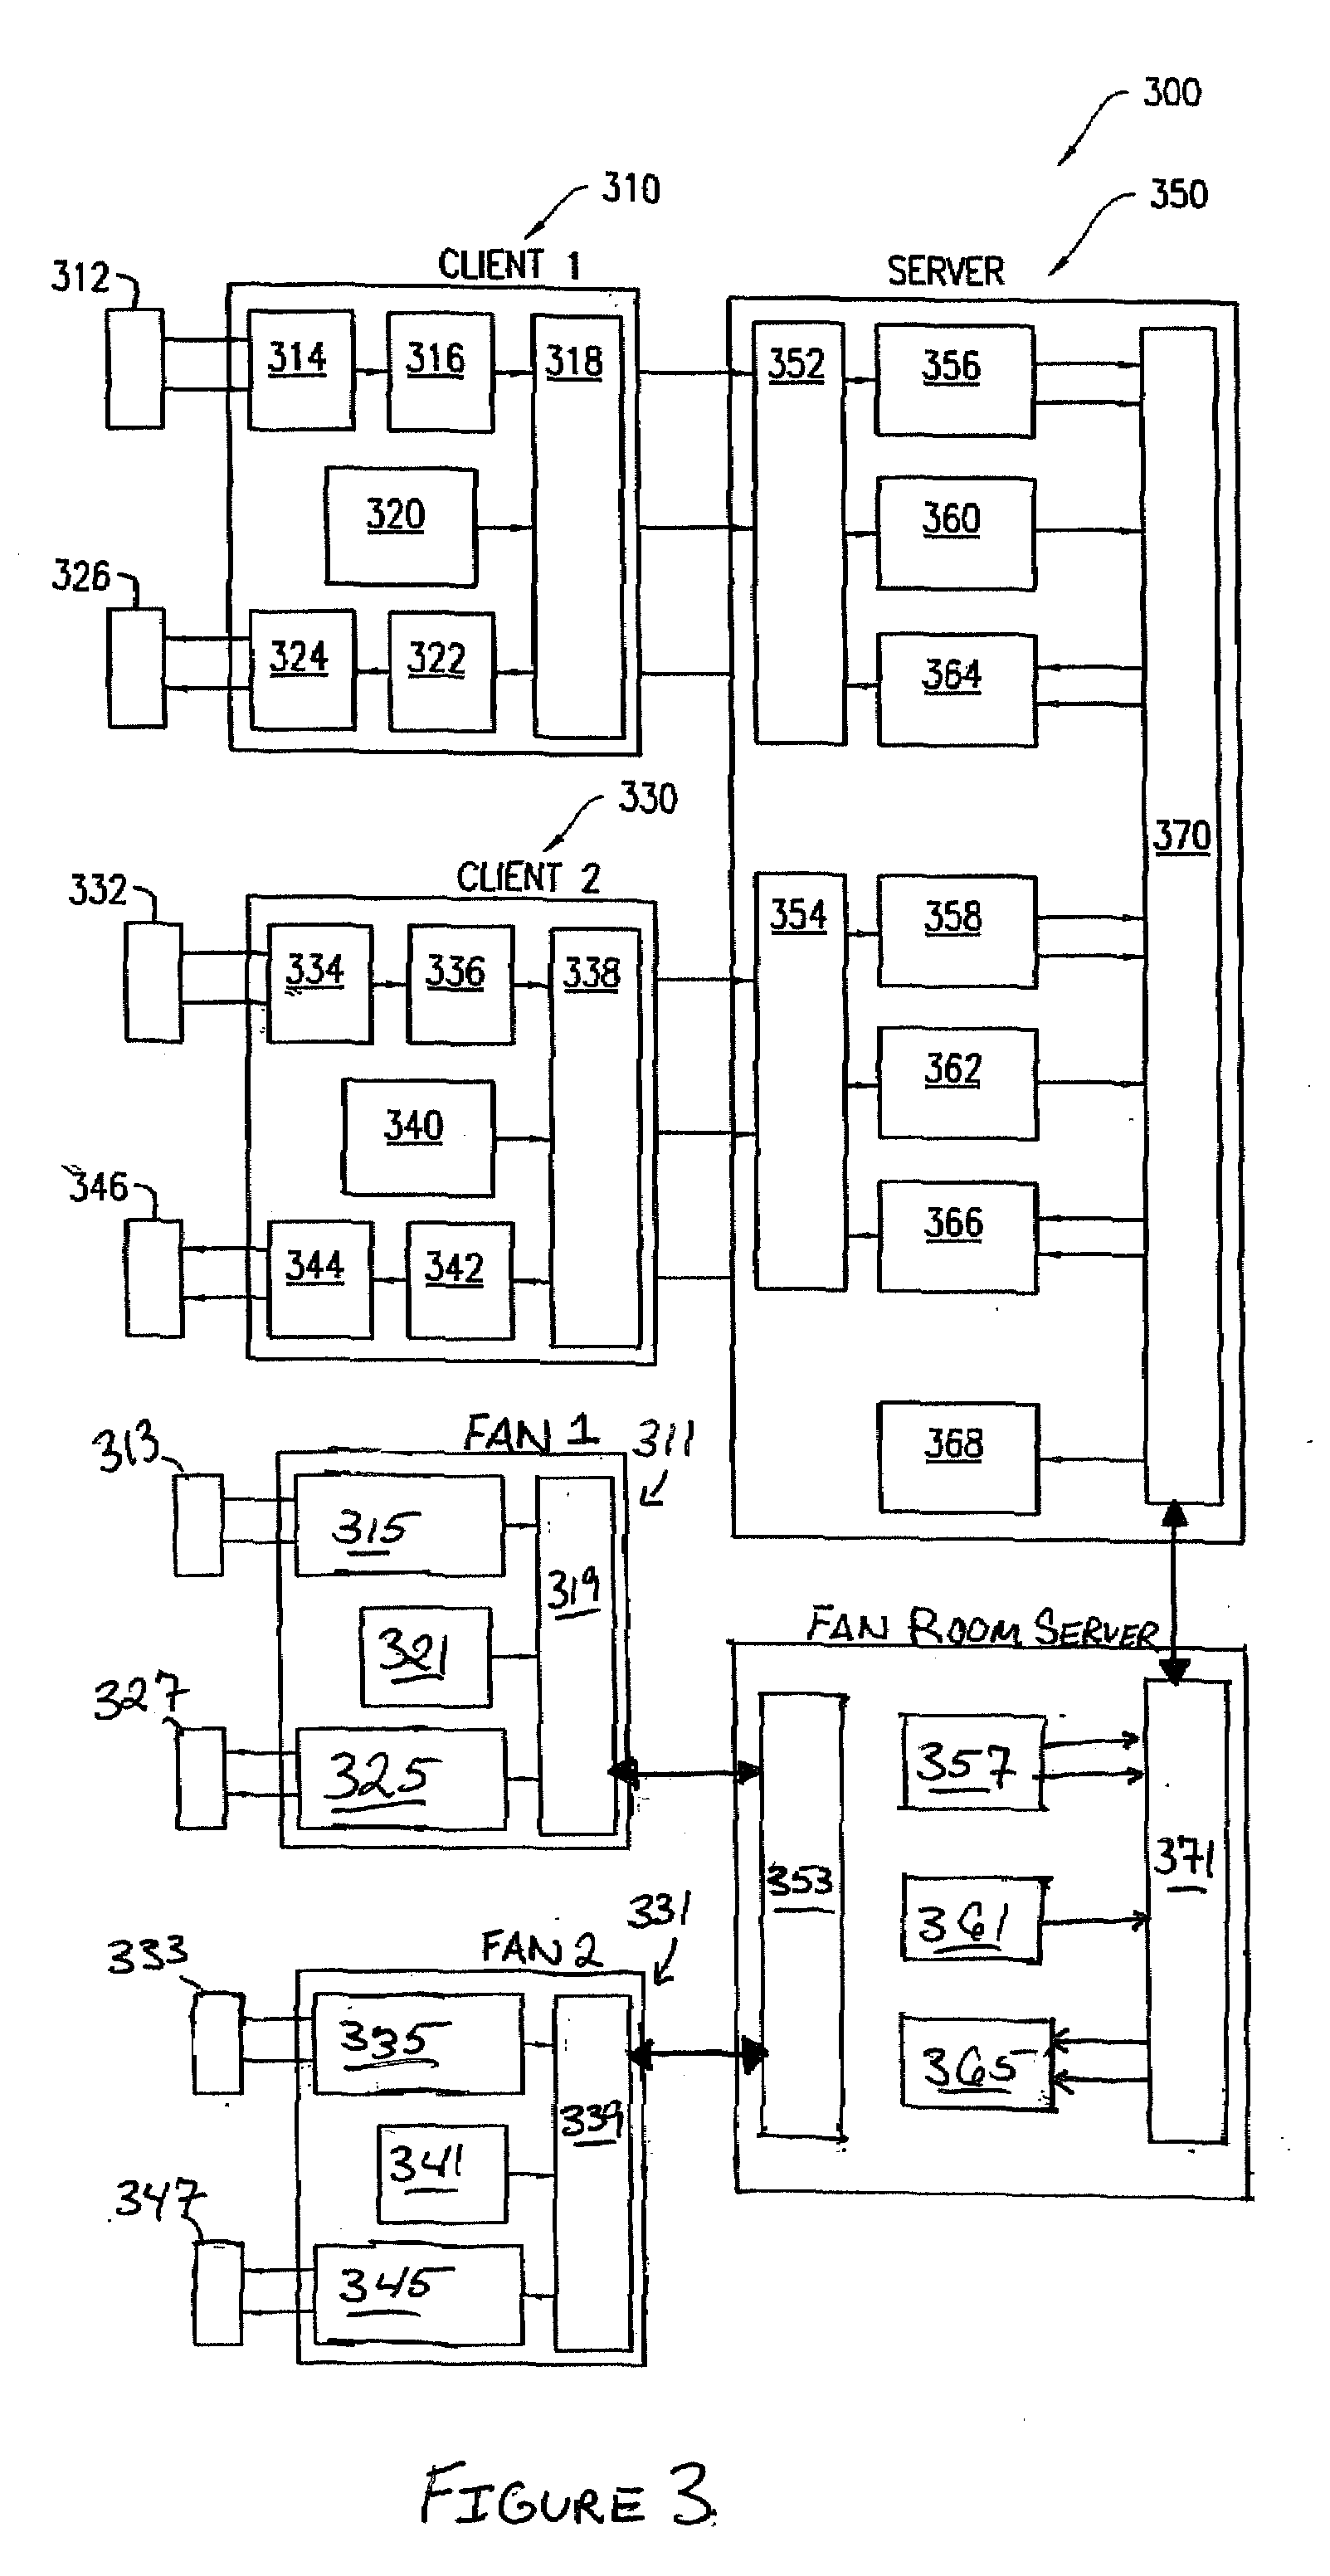 Method and apparatus for a virtual concert utilizing audio collaboration via a global computer network